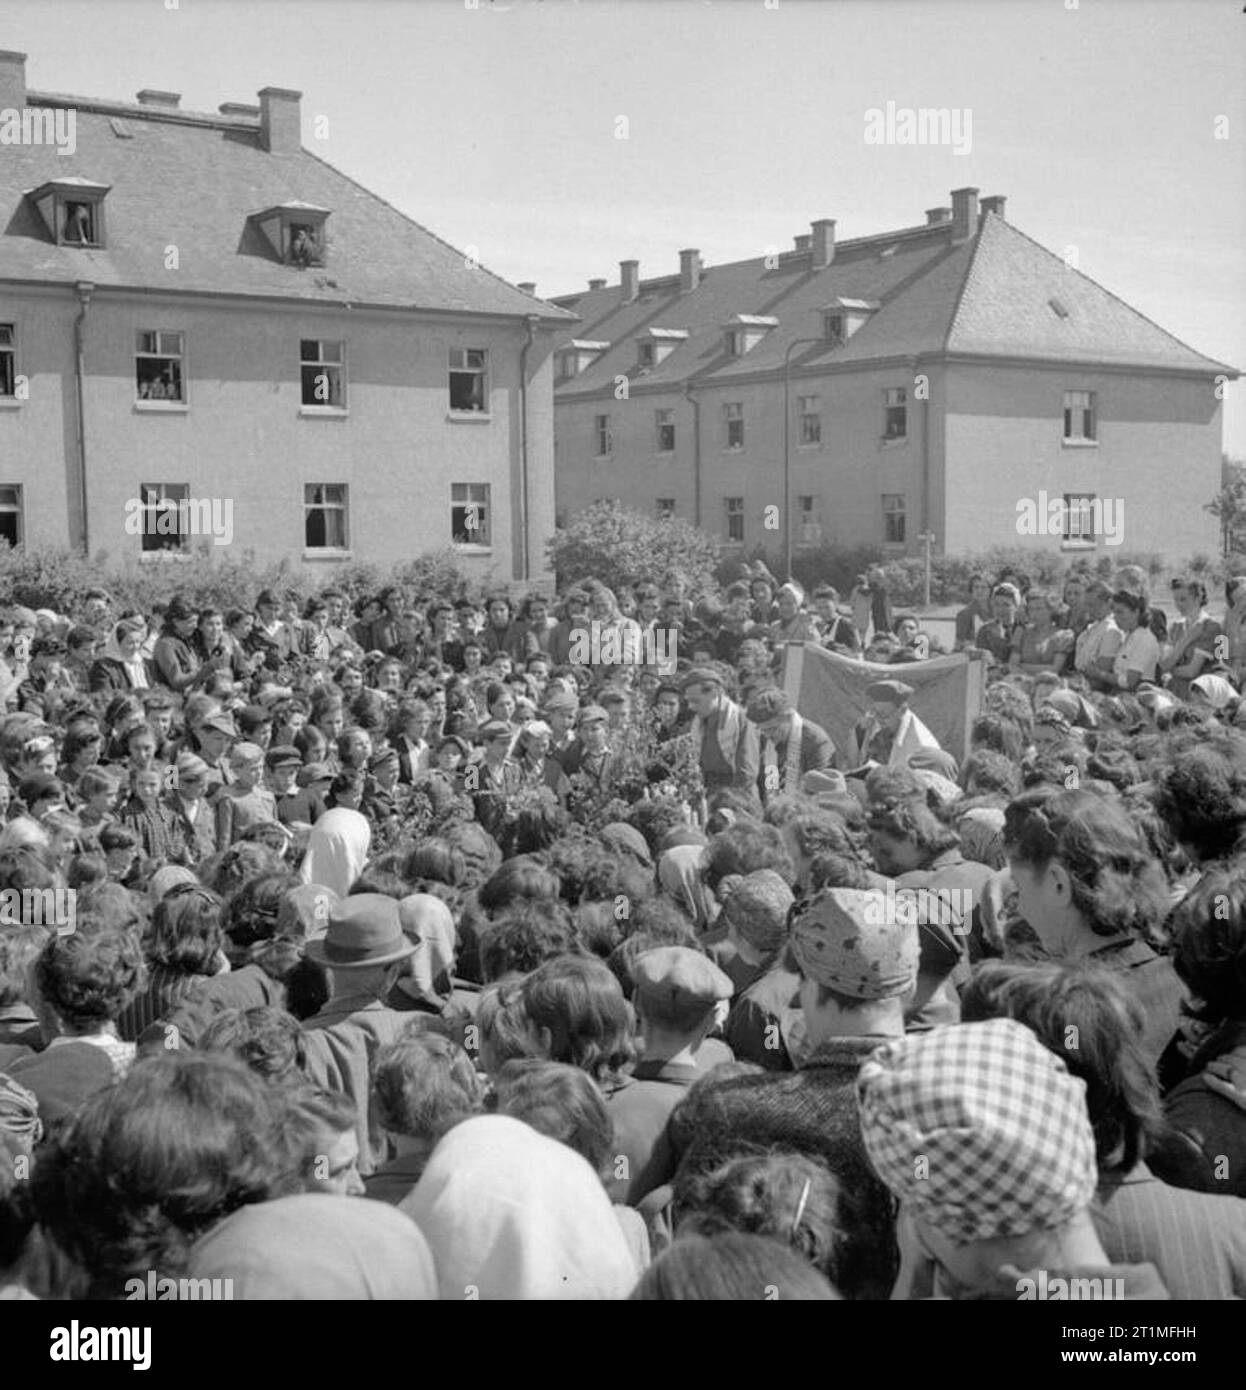 The Liberation of Bergen-belsen Concentration Camp, May 1945 Jewish camp inmates hold an open air service to celebrate the Jewish Summer Festival of Thanksgiving. The service was led by Rev Leslie H Hardman, Senior Jewish Chaplain to the British 2nd Army, and former camp inmates, Rabbi H Helfgott of Jugoslovia and Rabbi B Goldfinger of Poland. Behind the open air altar internees hold up a tapestry originally owned by the Jewish community in Sicily, which was brought into the camp and hidden by internees until liberation. Stock Photo